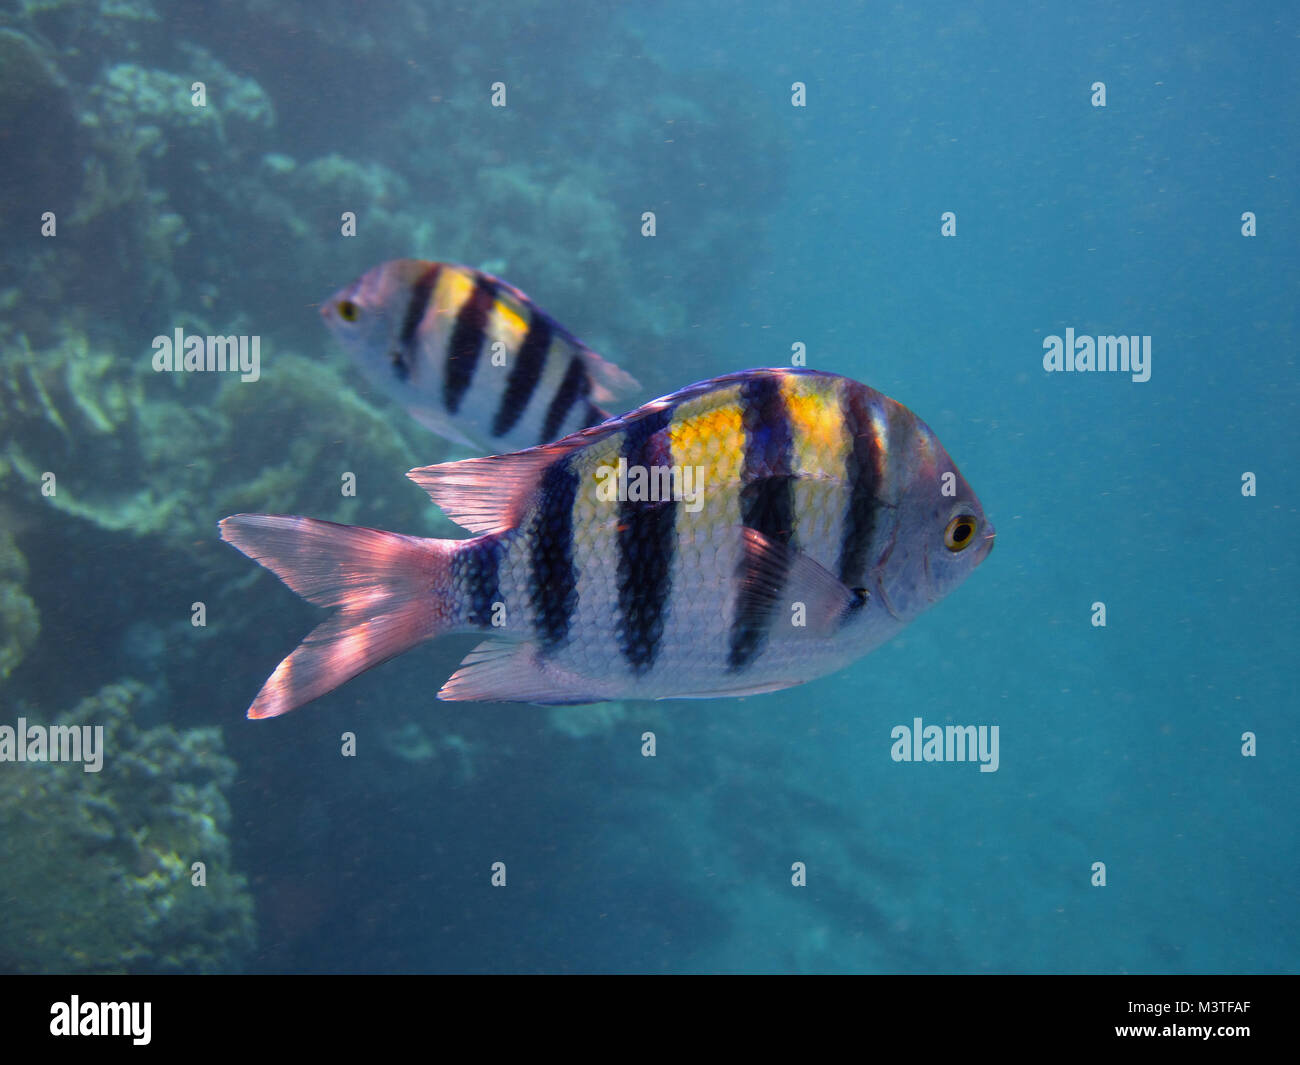 Small Black And Yellow Striped Fish Swimming In Coral Reef In The